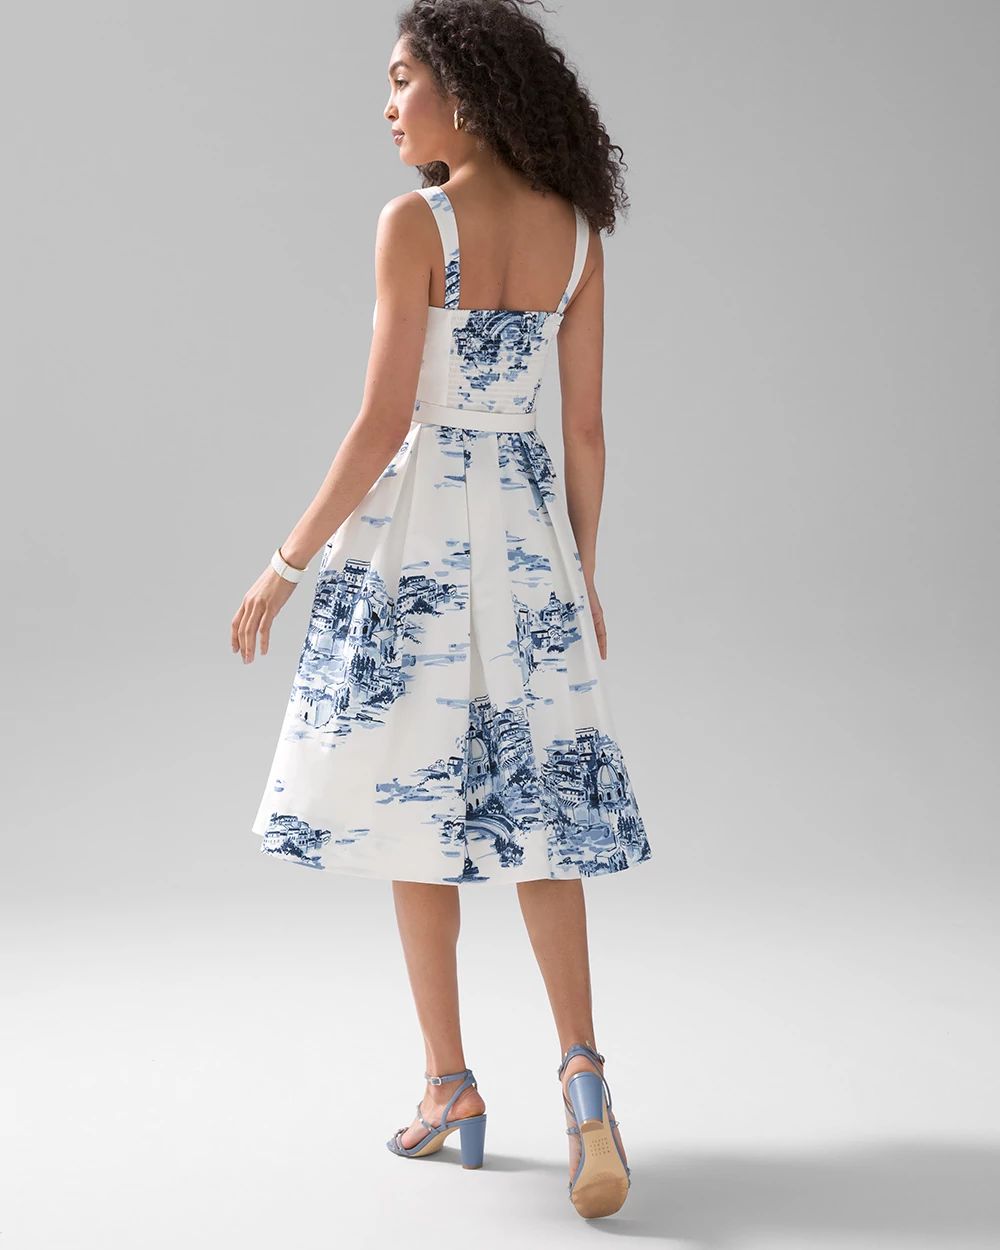 Toile Poplin Fit & Flare Dress click to view larger image.